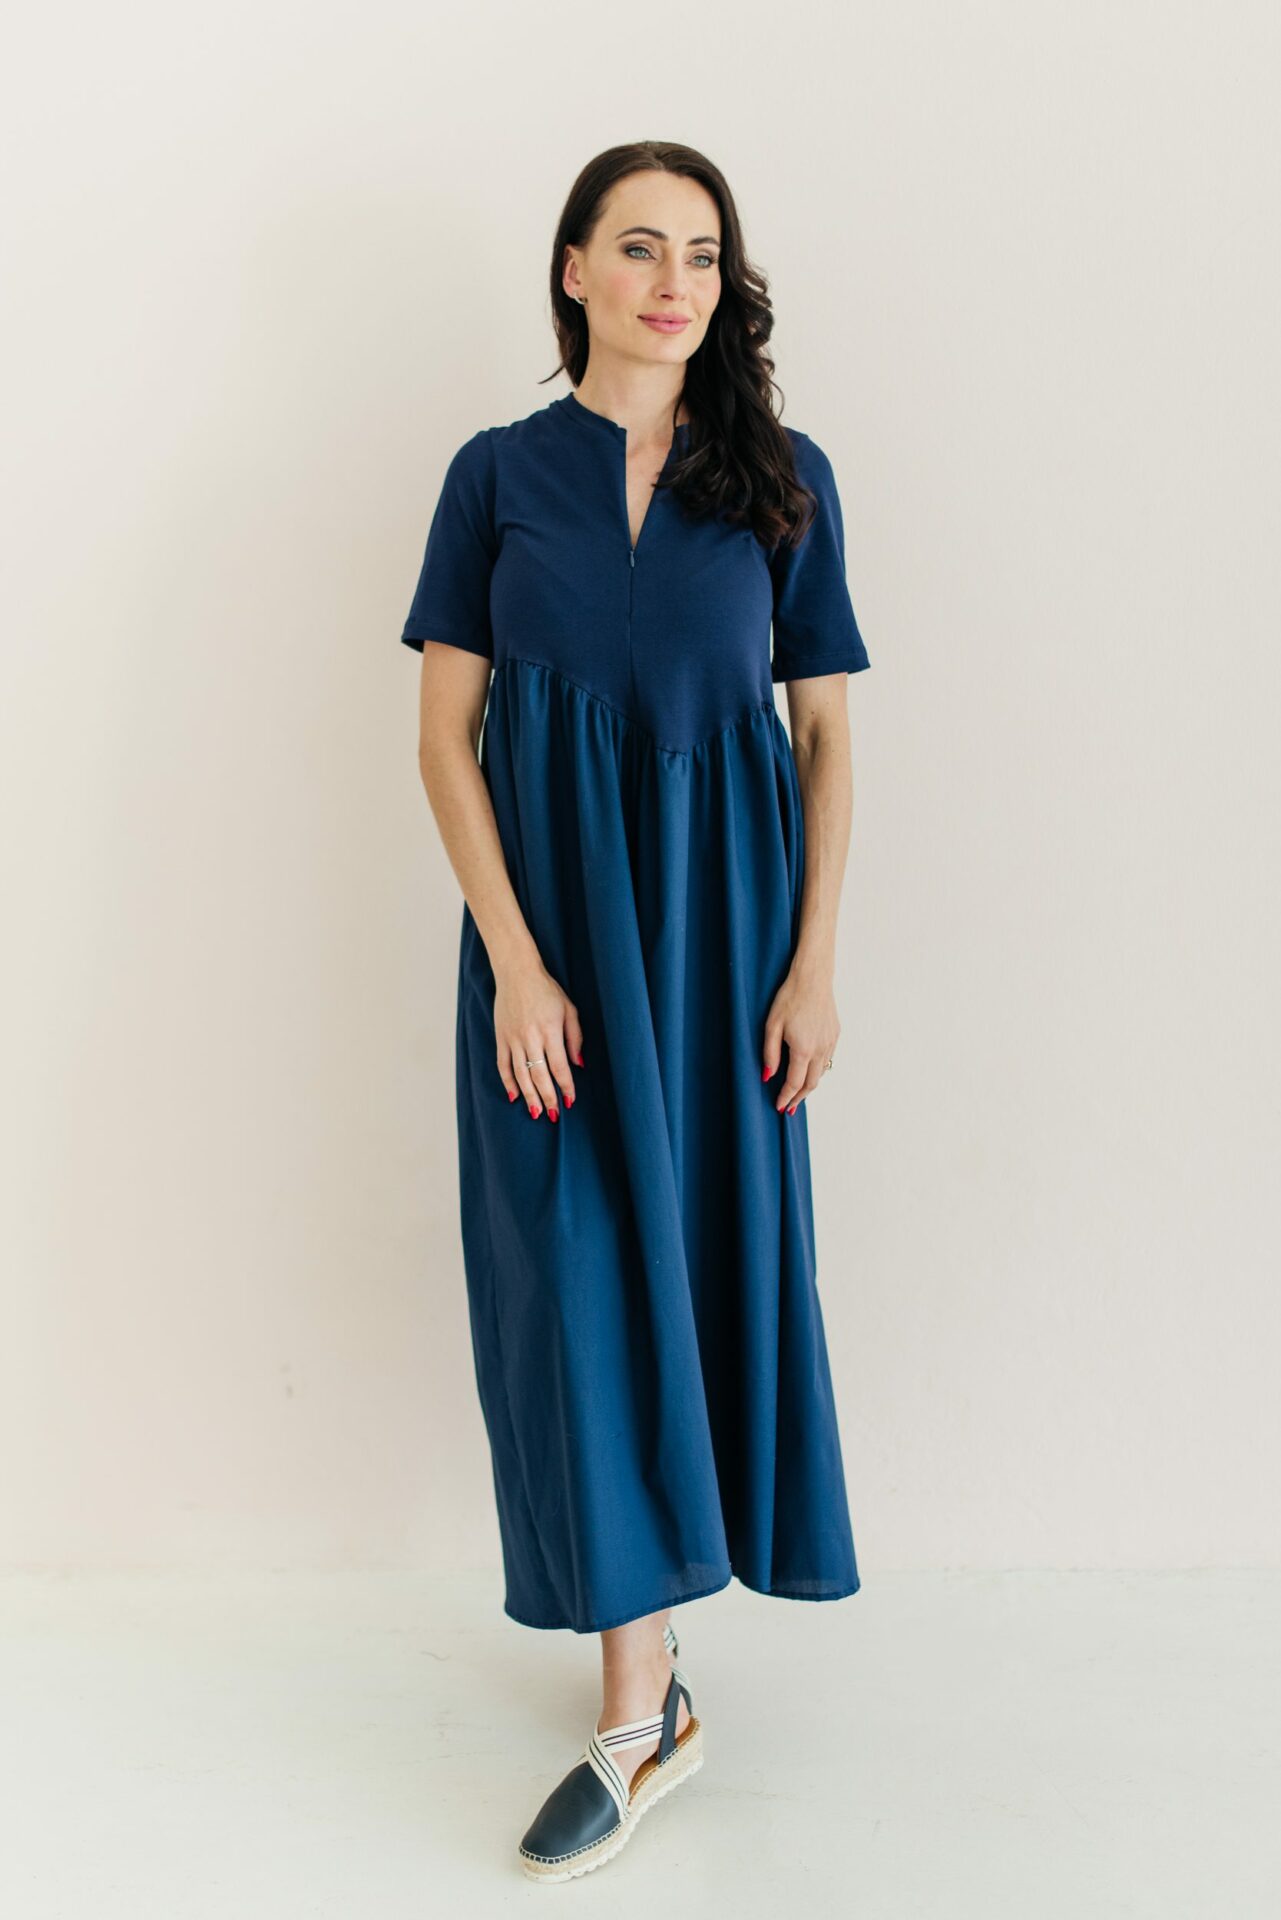 Buy The Up And Down Dress Navy - Momsy Maternity, Nursing, & Womenswear